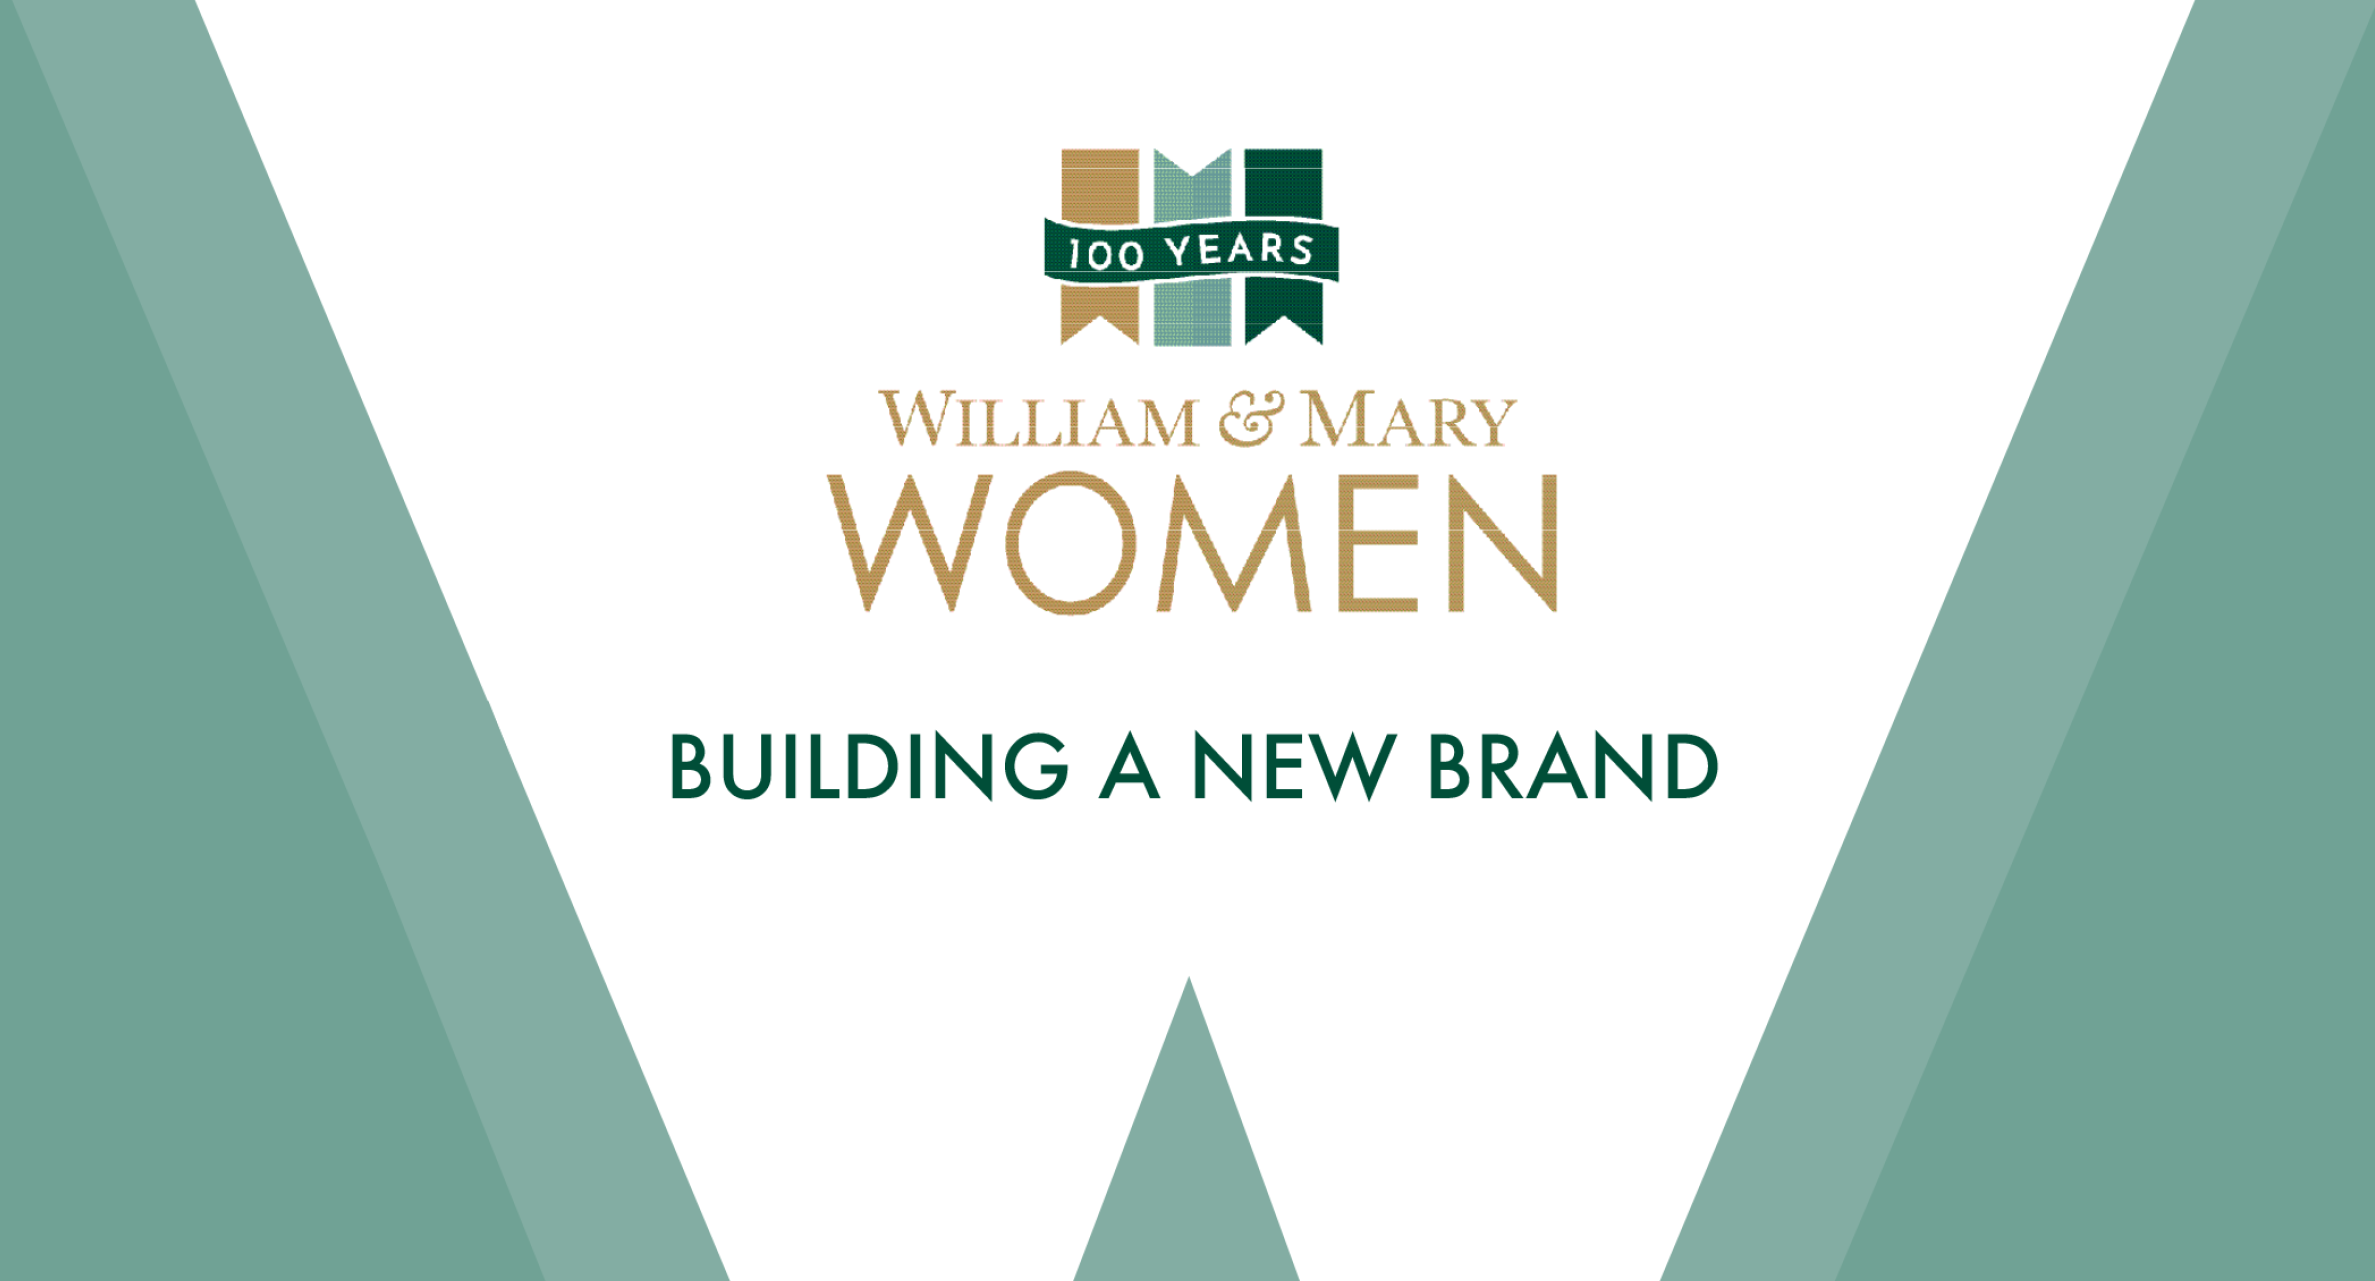 William & Mary Women: Building A New Brand